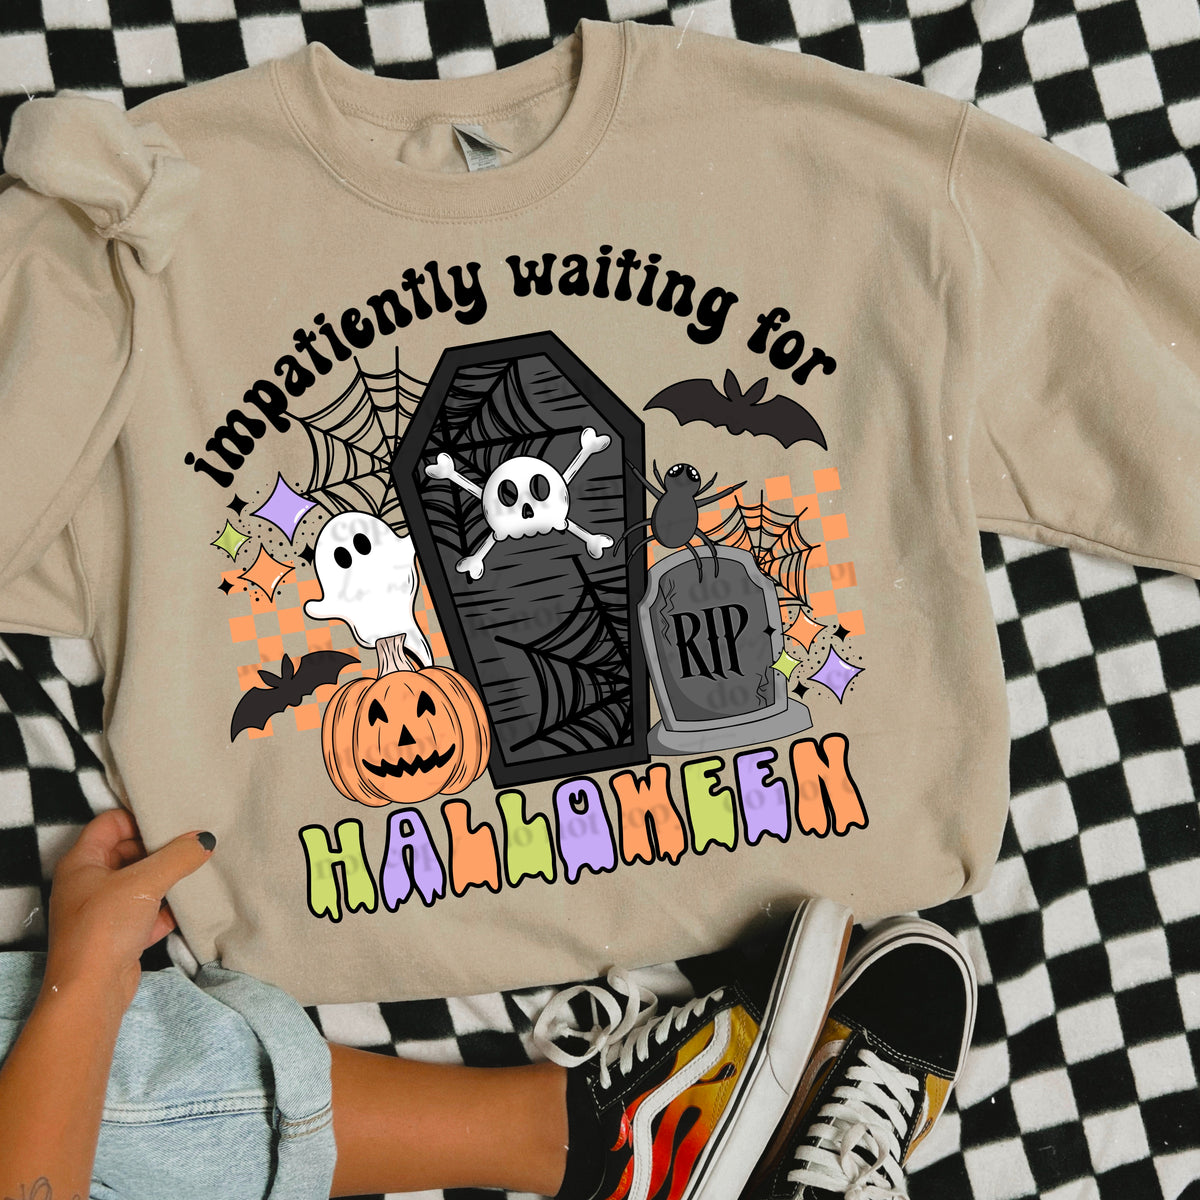 Impatiently waiting or halloween